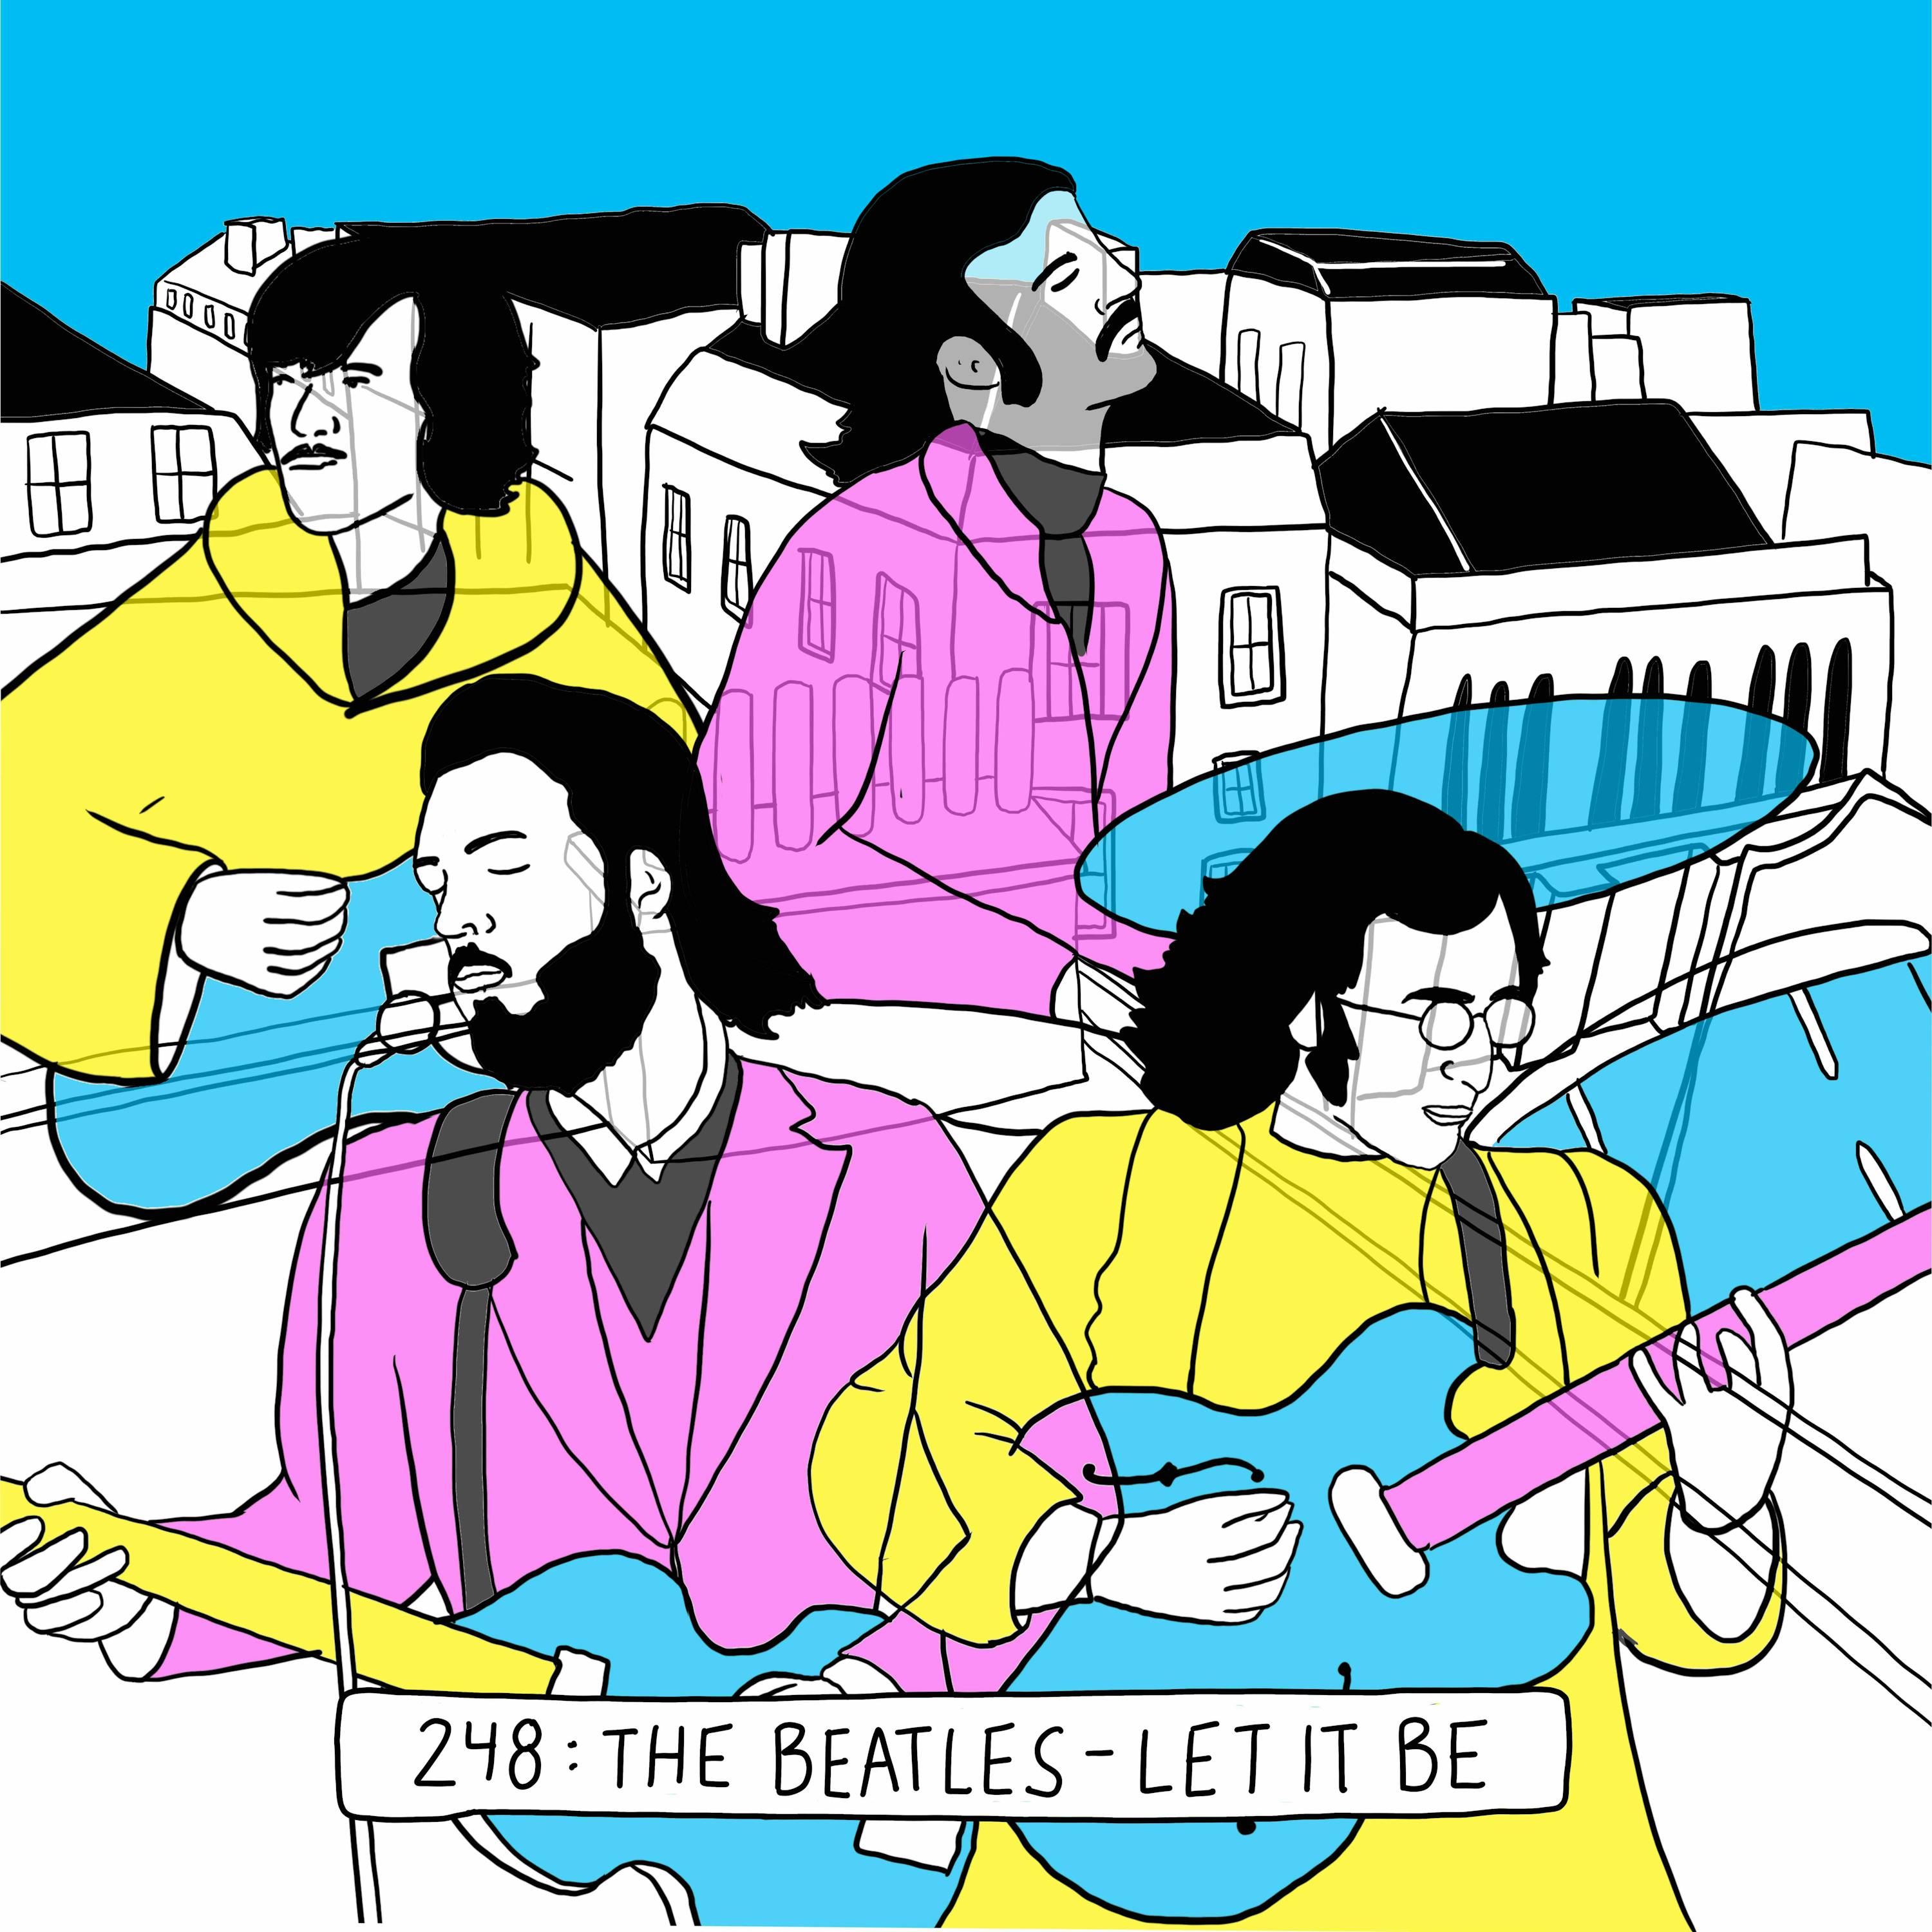 The Beatles get back to their roots